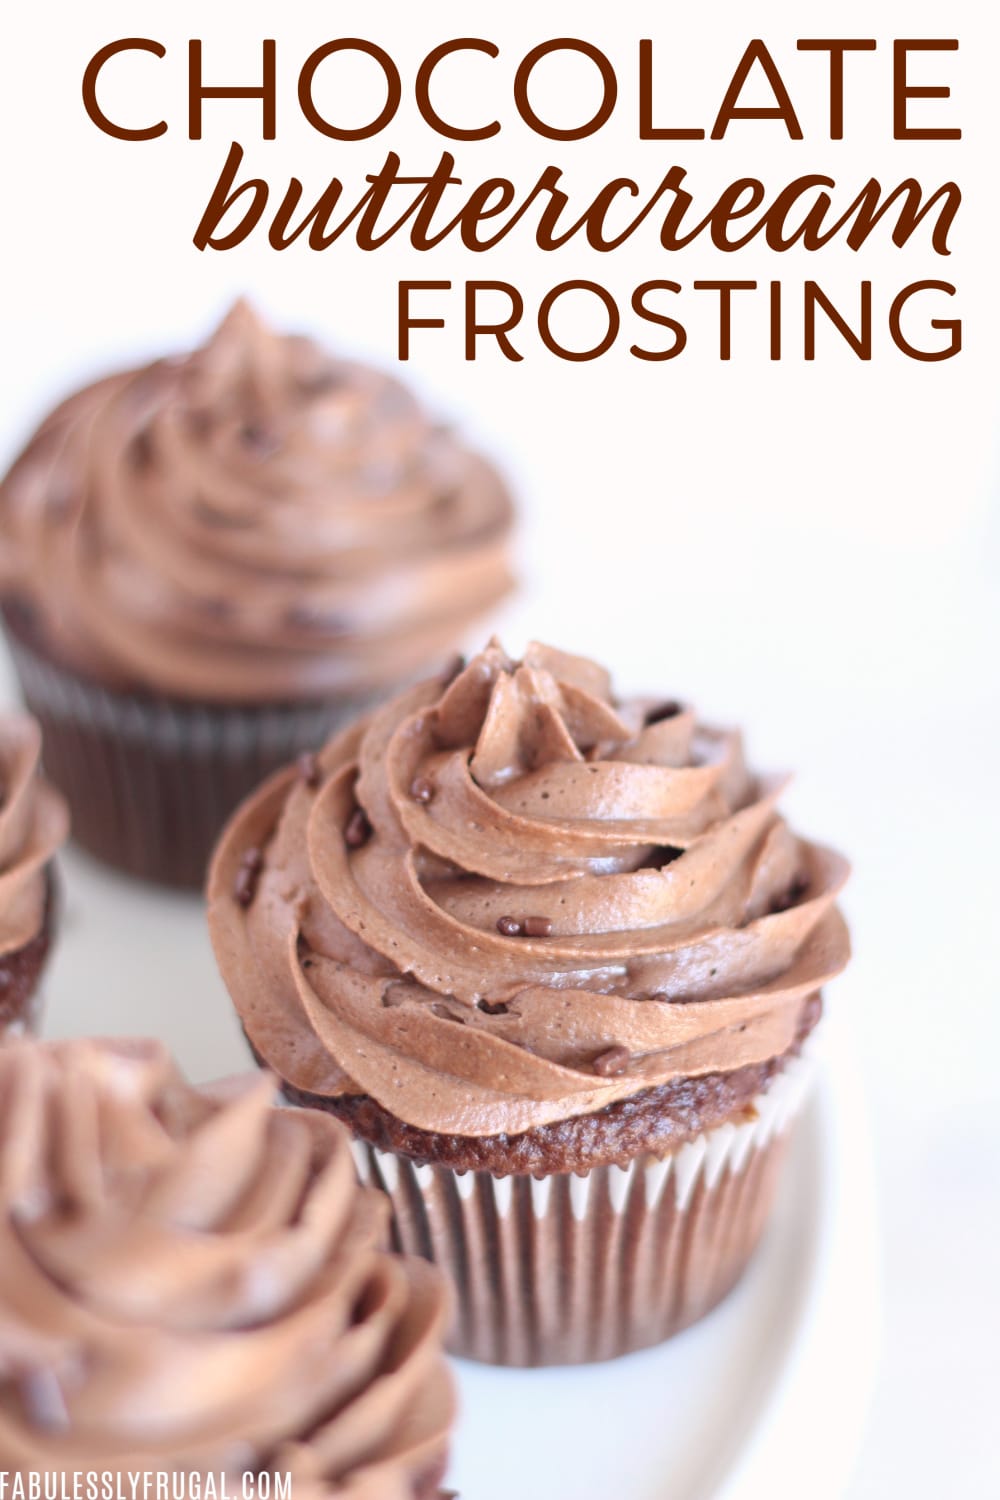 Best Chocolate Buttercream Frosting Recipe Fabulessly Frugal